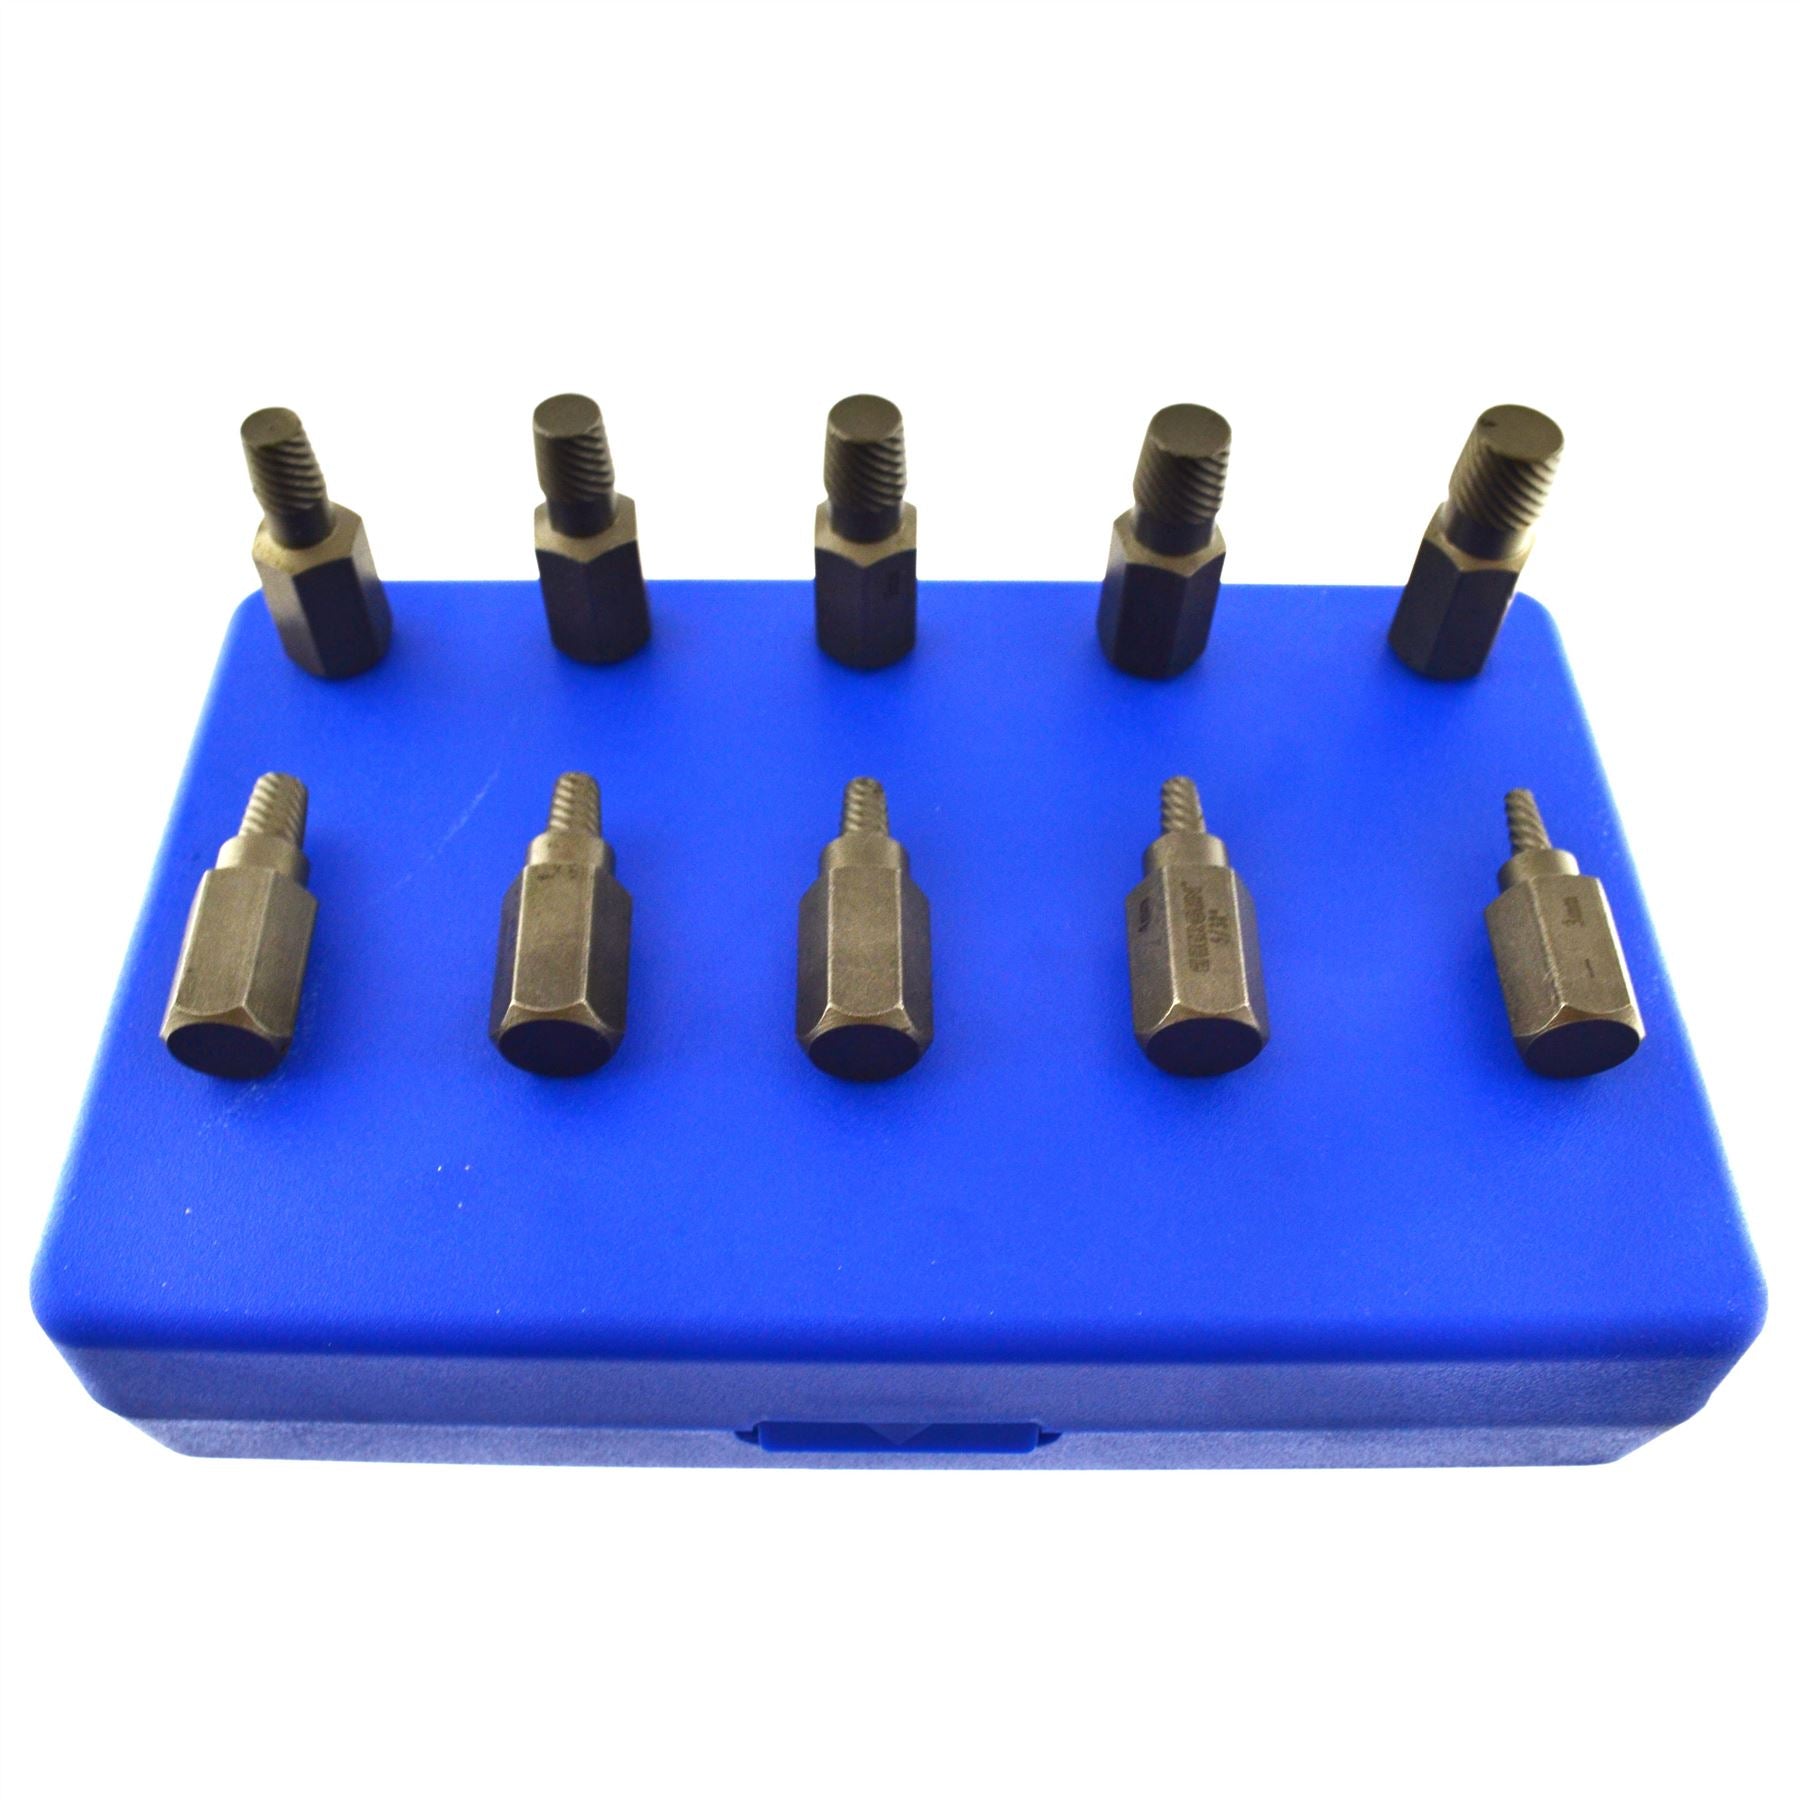 1/2" Screw Stud Extractor Remover Set Reverse Thread Easy Out 3-11mm 10pc AT077